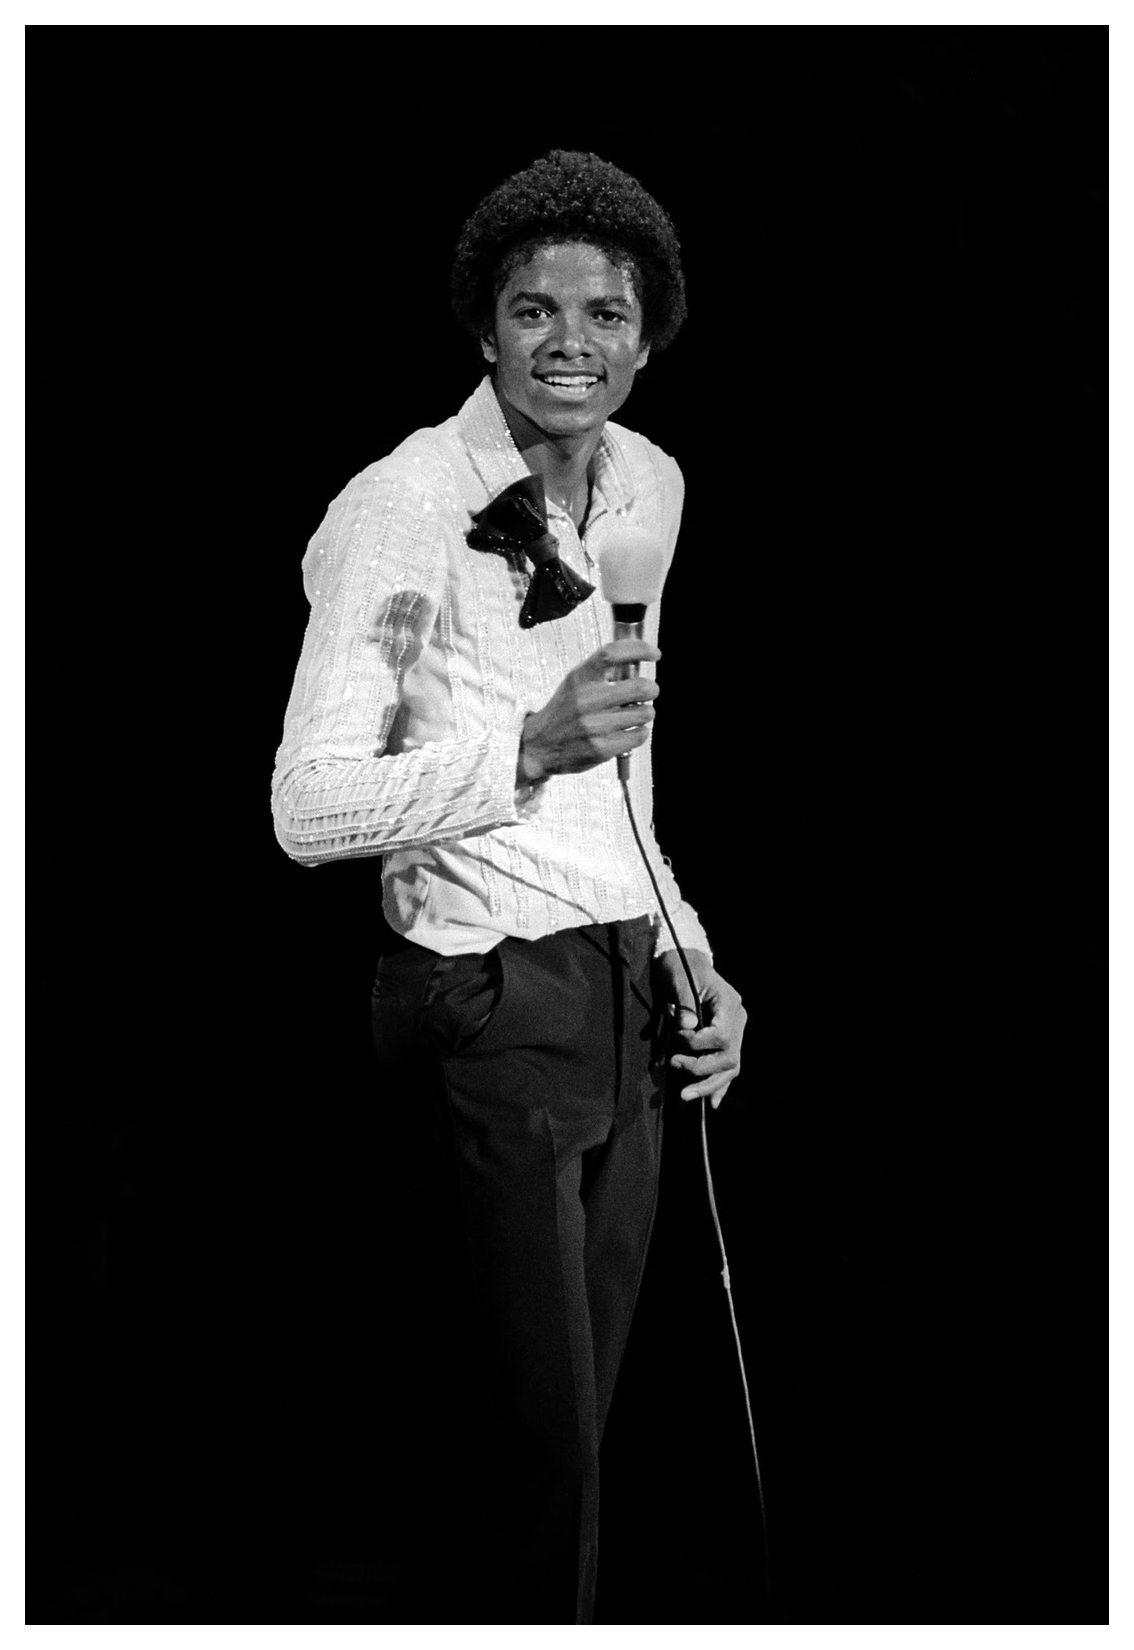 michael-jackson-1958-2009-posing-during-a-break-at-his-concert-in-nassau-coliseum-ny-1980-photo-by-andy-freeberg.jpg